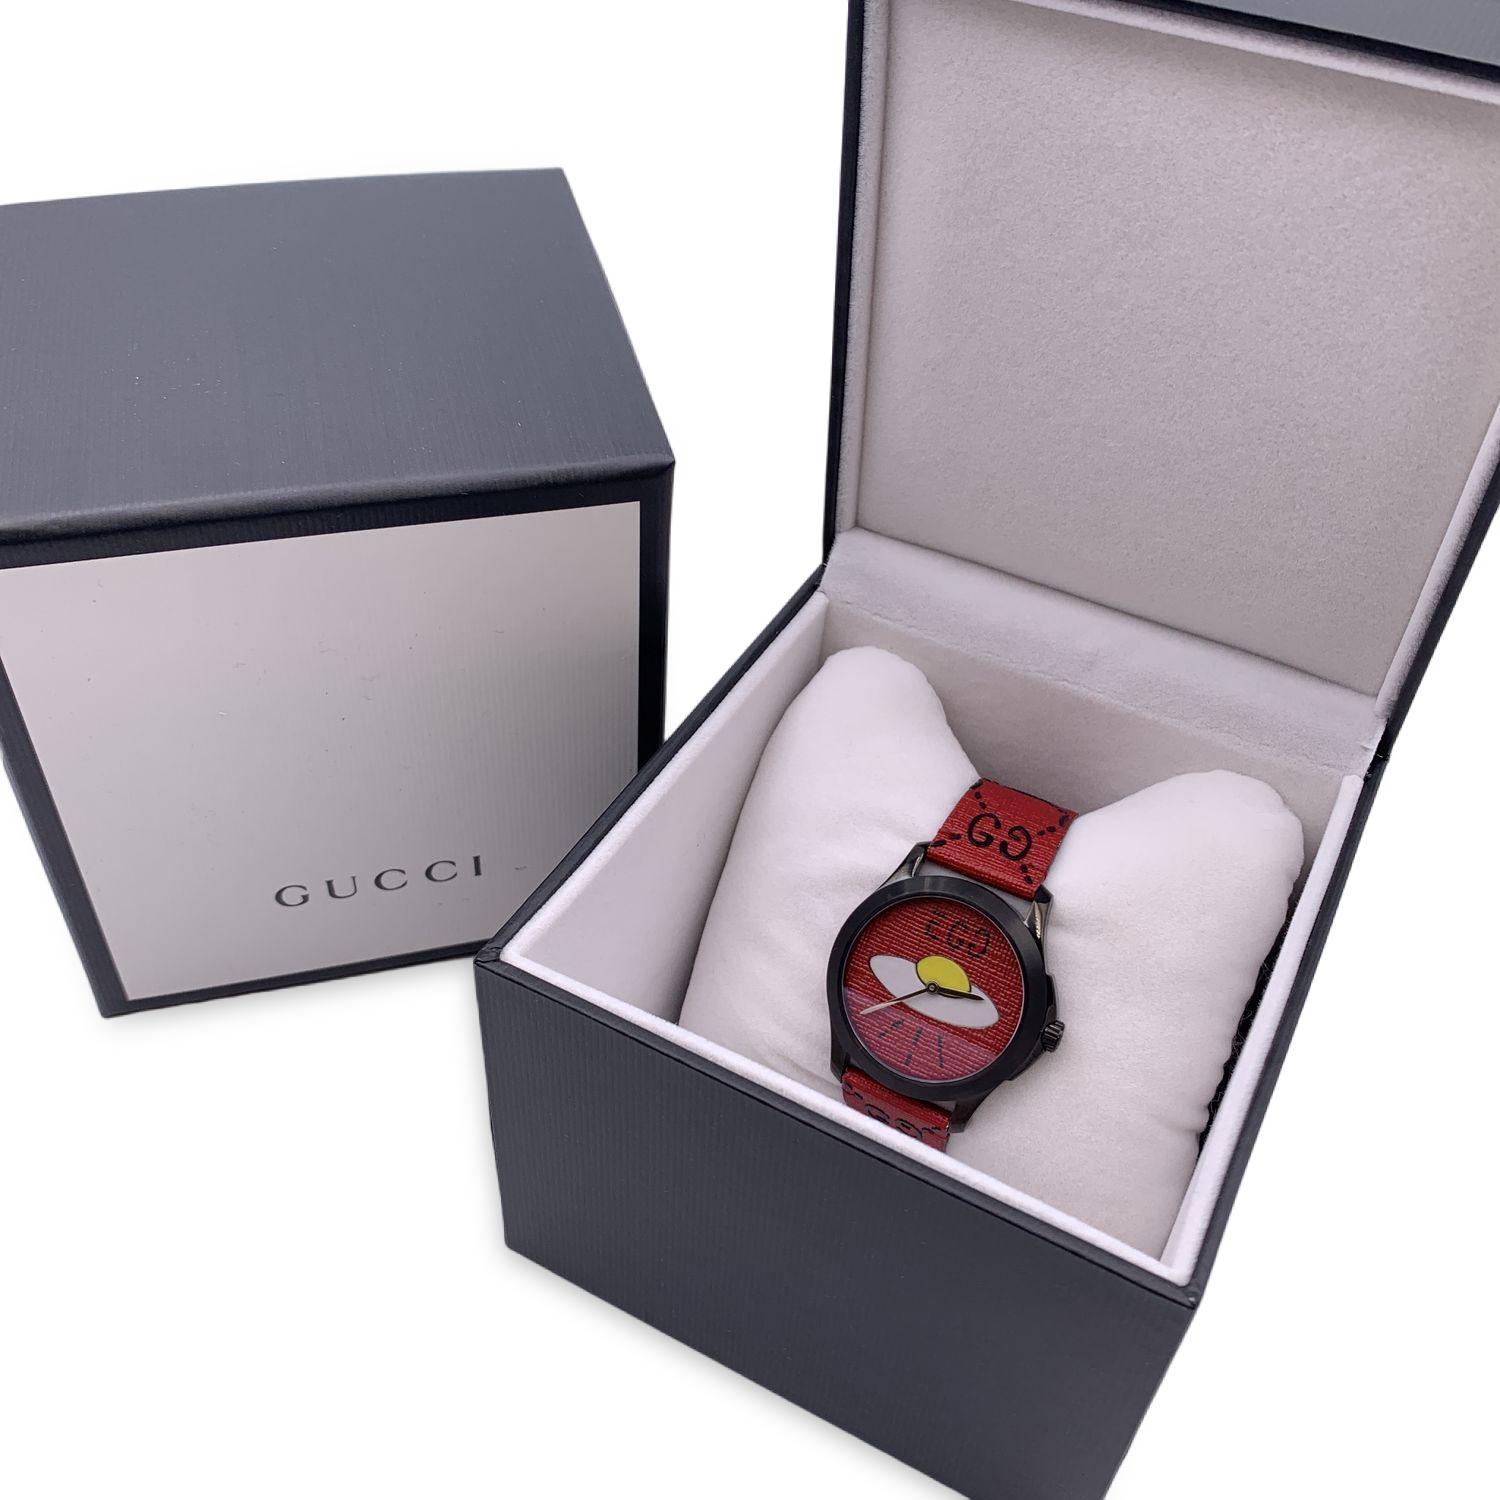 Gucci 'G-Timeless - Gucci Ghost Ufo Egg' stainless steel unisex watch. Model 126.4. Round black PVD Plated steel metal case (40 mm - crown included). Red dial with Ufo egg motif with two silver hands. Sapphire crystal. Swiss Made Quartz movement.